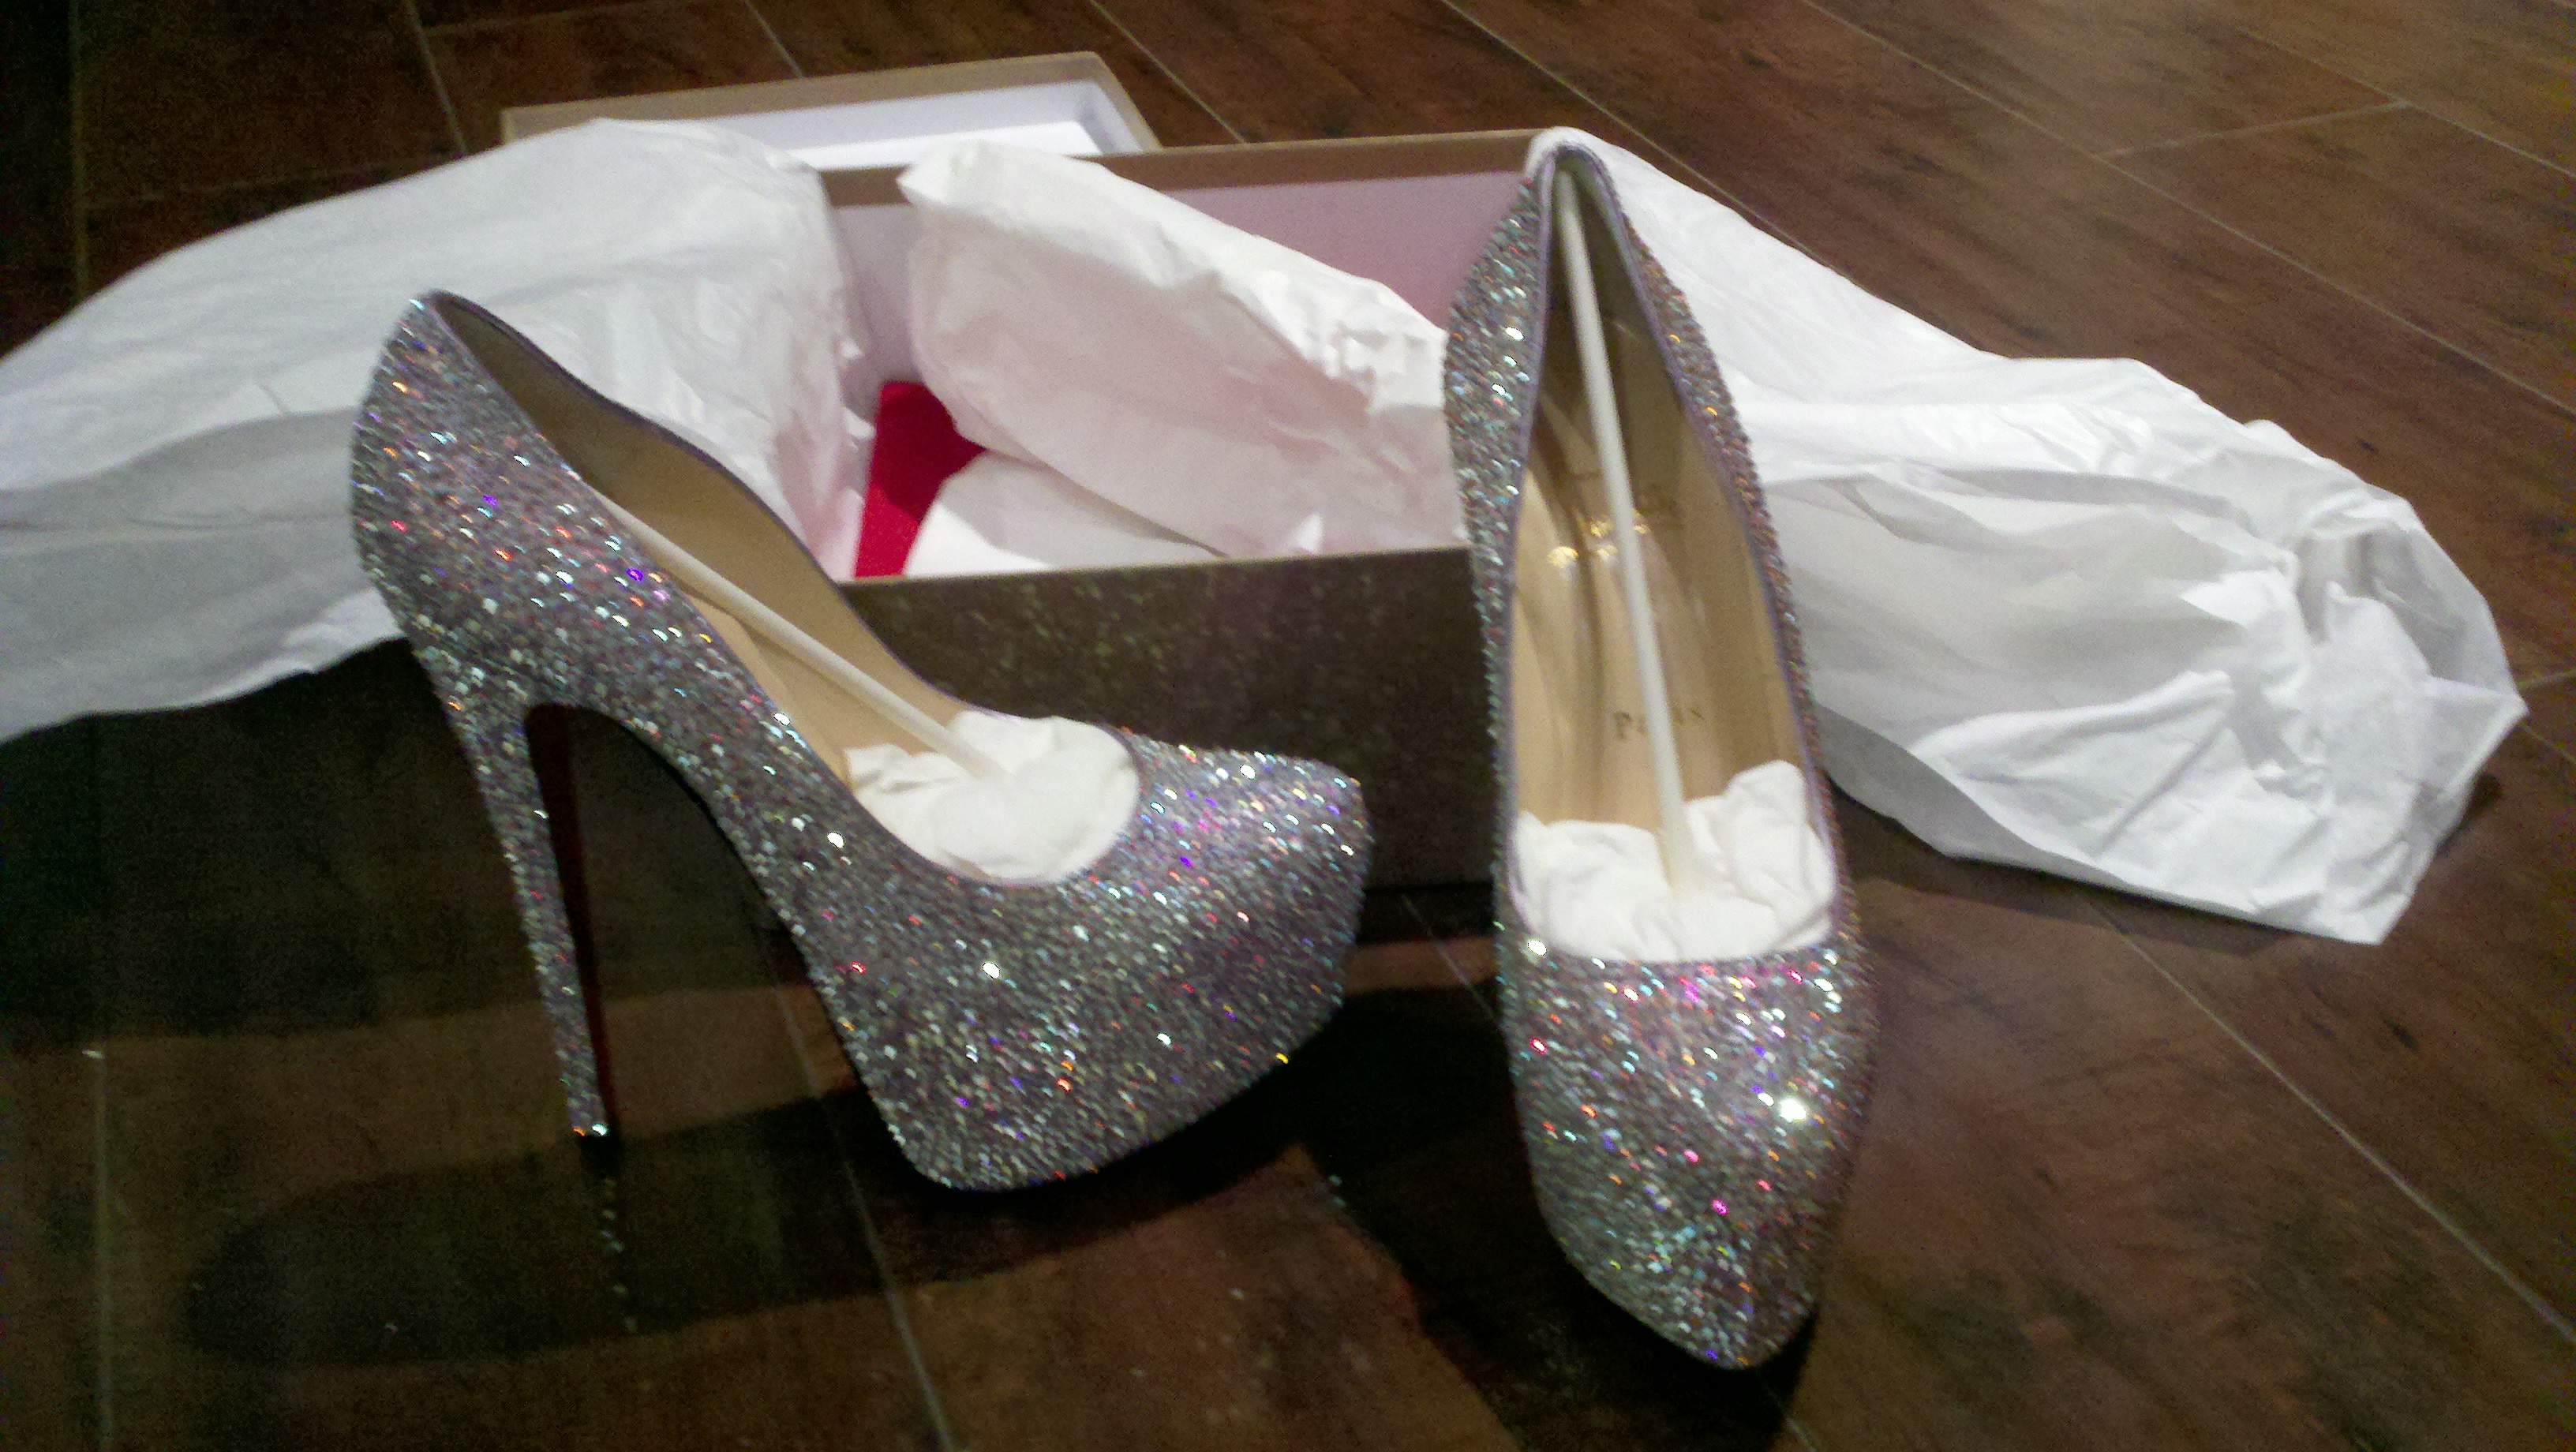 Christian Louboutin Daffodile Crystal AB Pumps are coming soon ...  